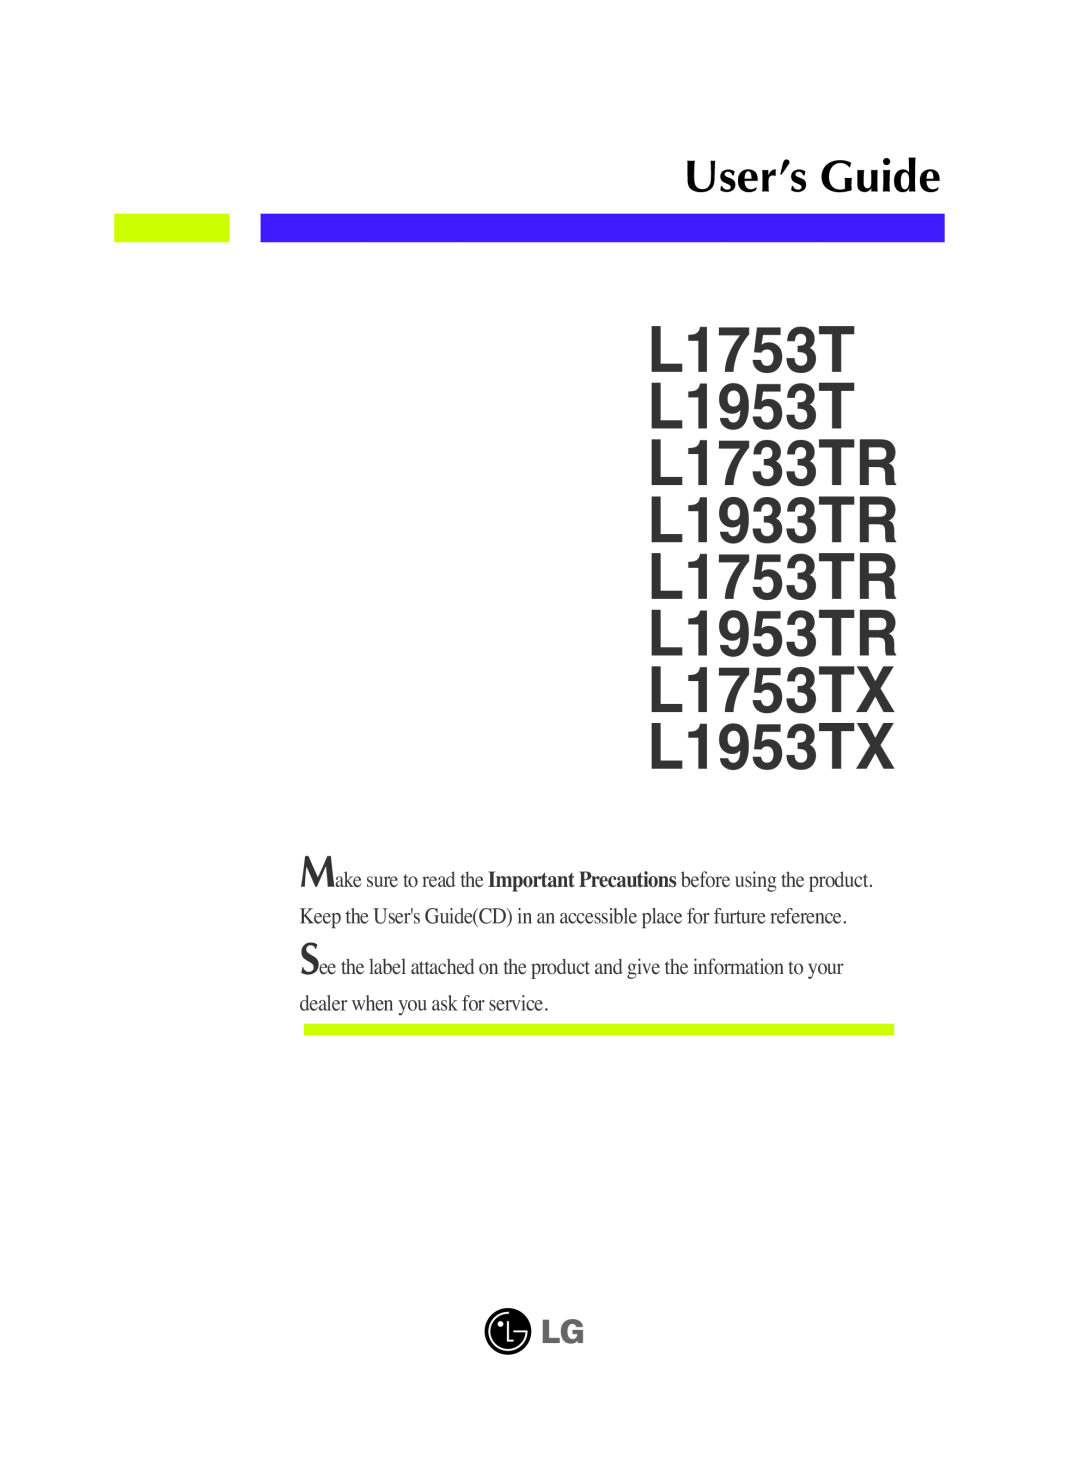 LG Electronics L1733TR service manual CHASSIS NO. LM57B, Before Servicing The Unit, Same model for Service, Color Monitor 